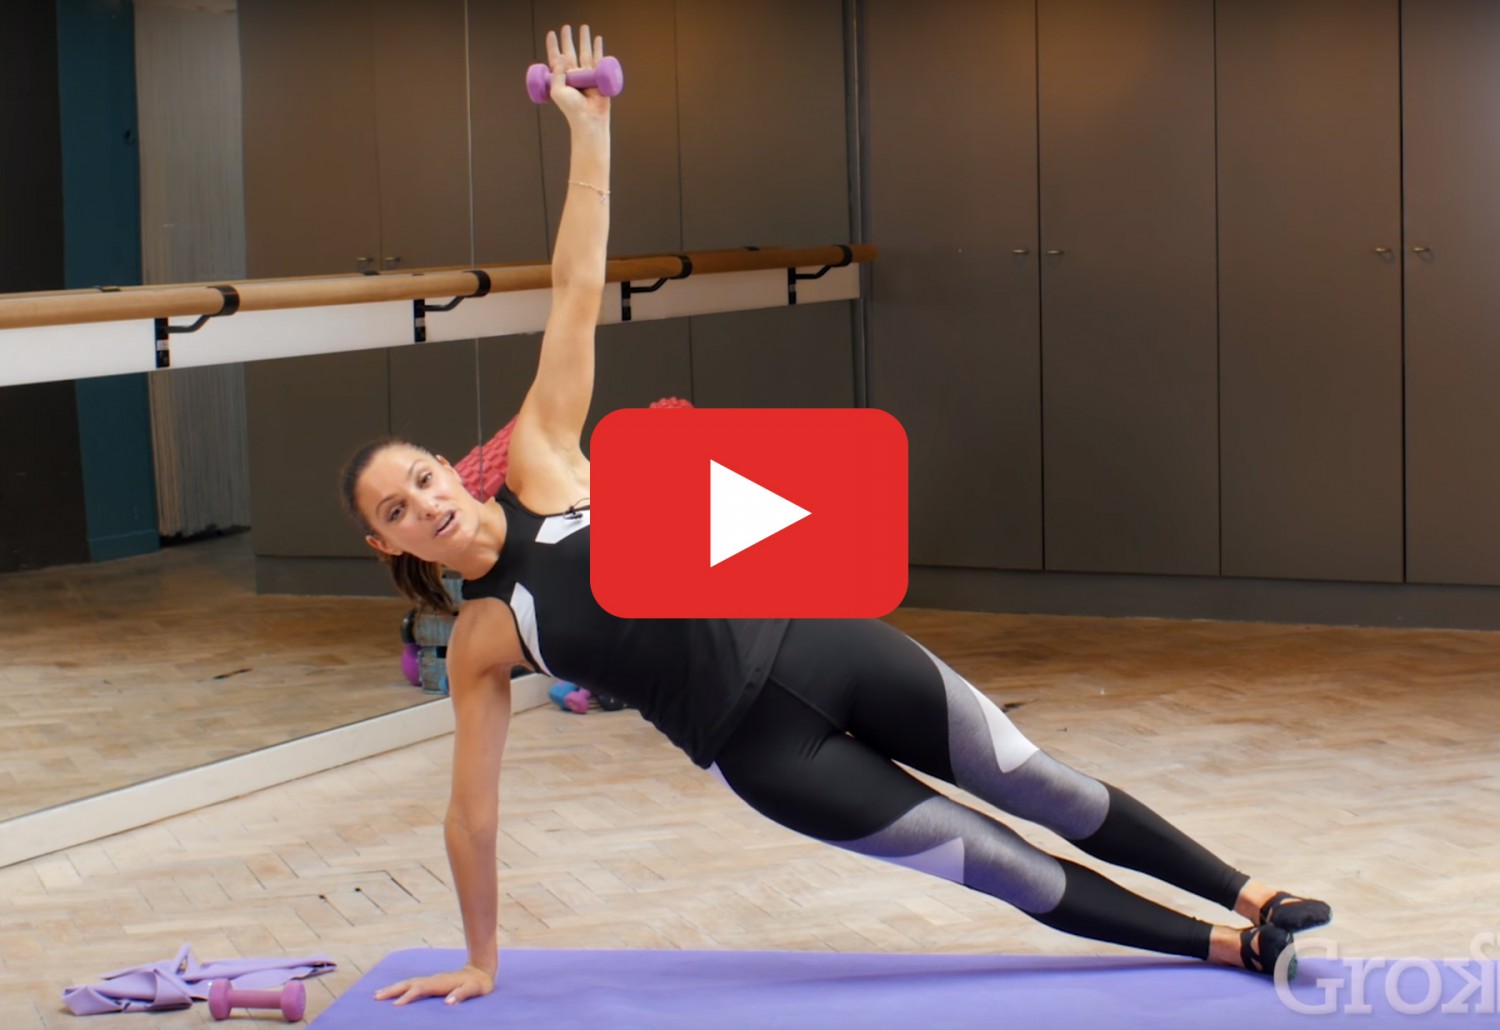 Barre Workout Video For Total Body Strength Greatist 1425